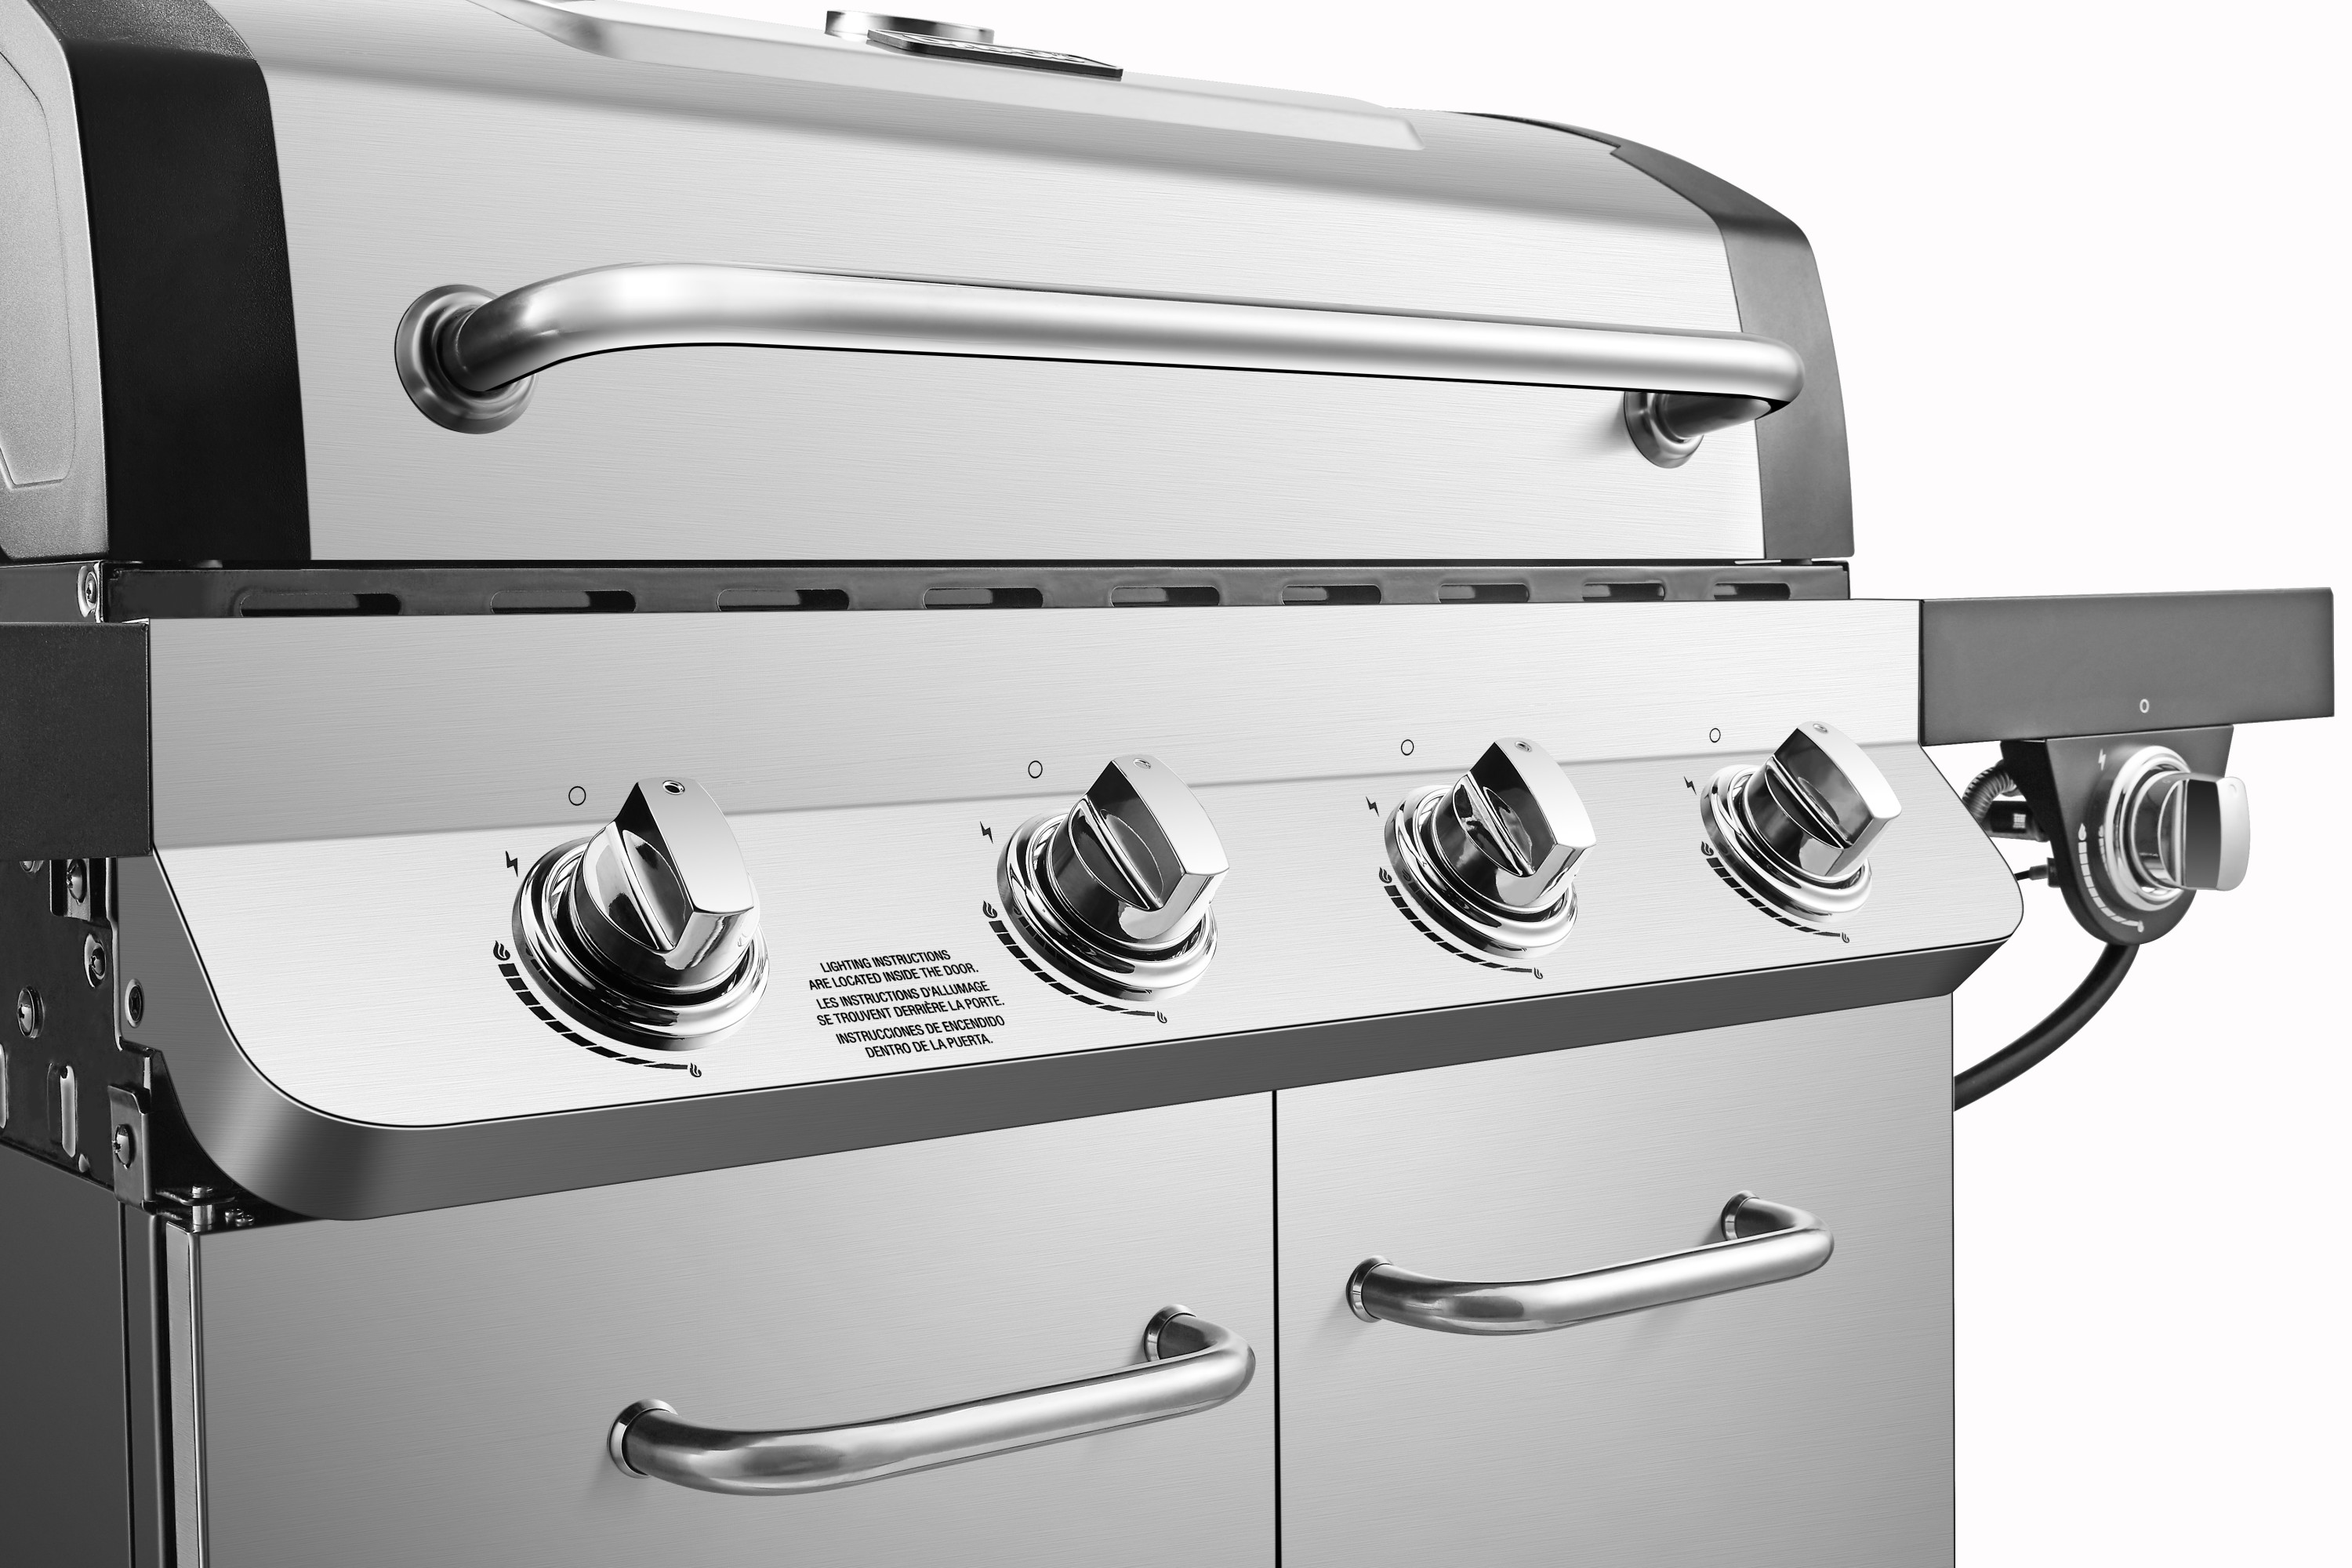 Dyna-Glo 4 Burner Silver and Black Propane Gas Grill - image 2 of 15